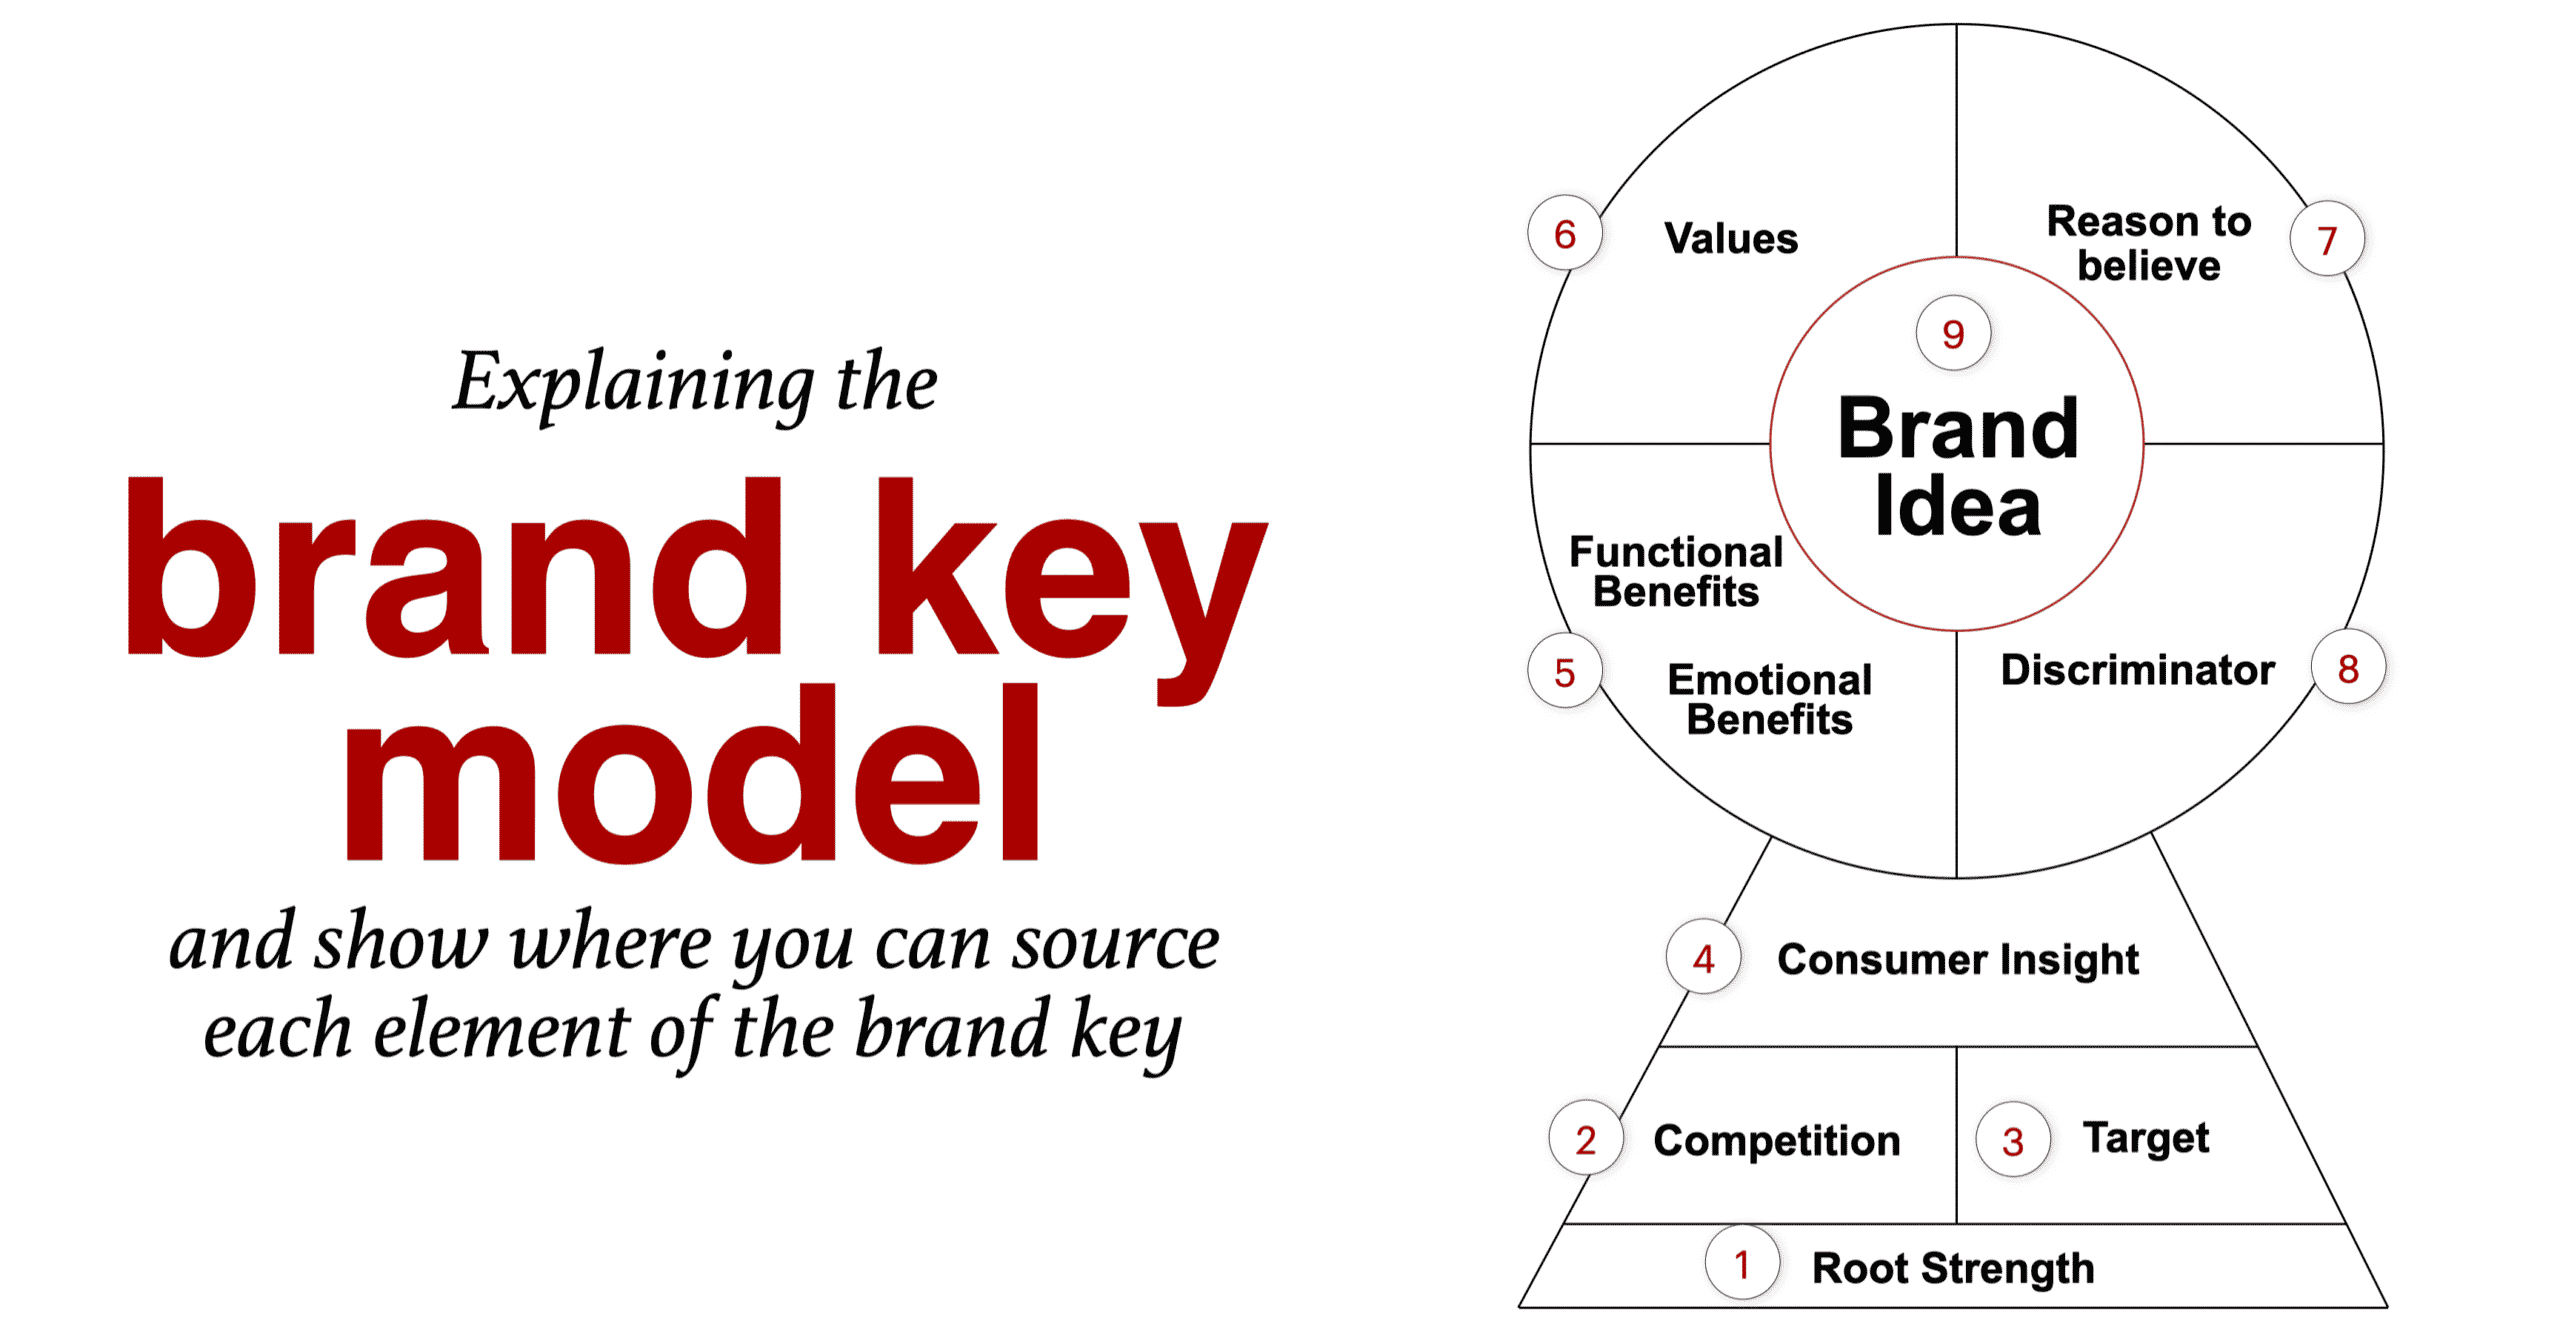 How to use a Brand Key Model to display your brand's USP